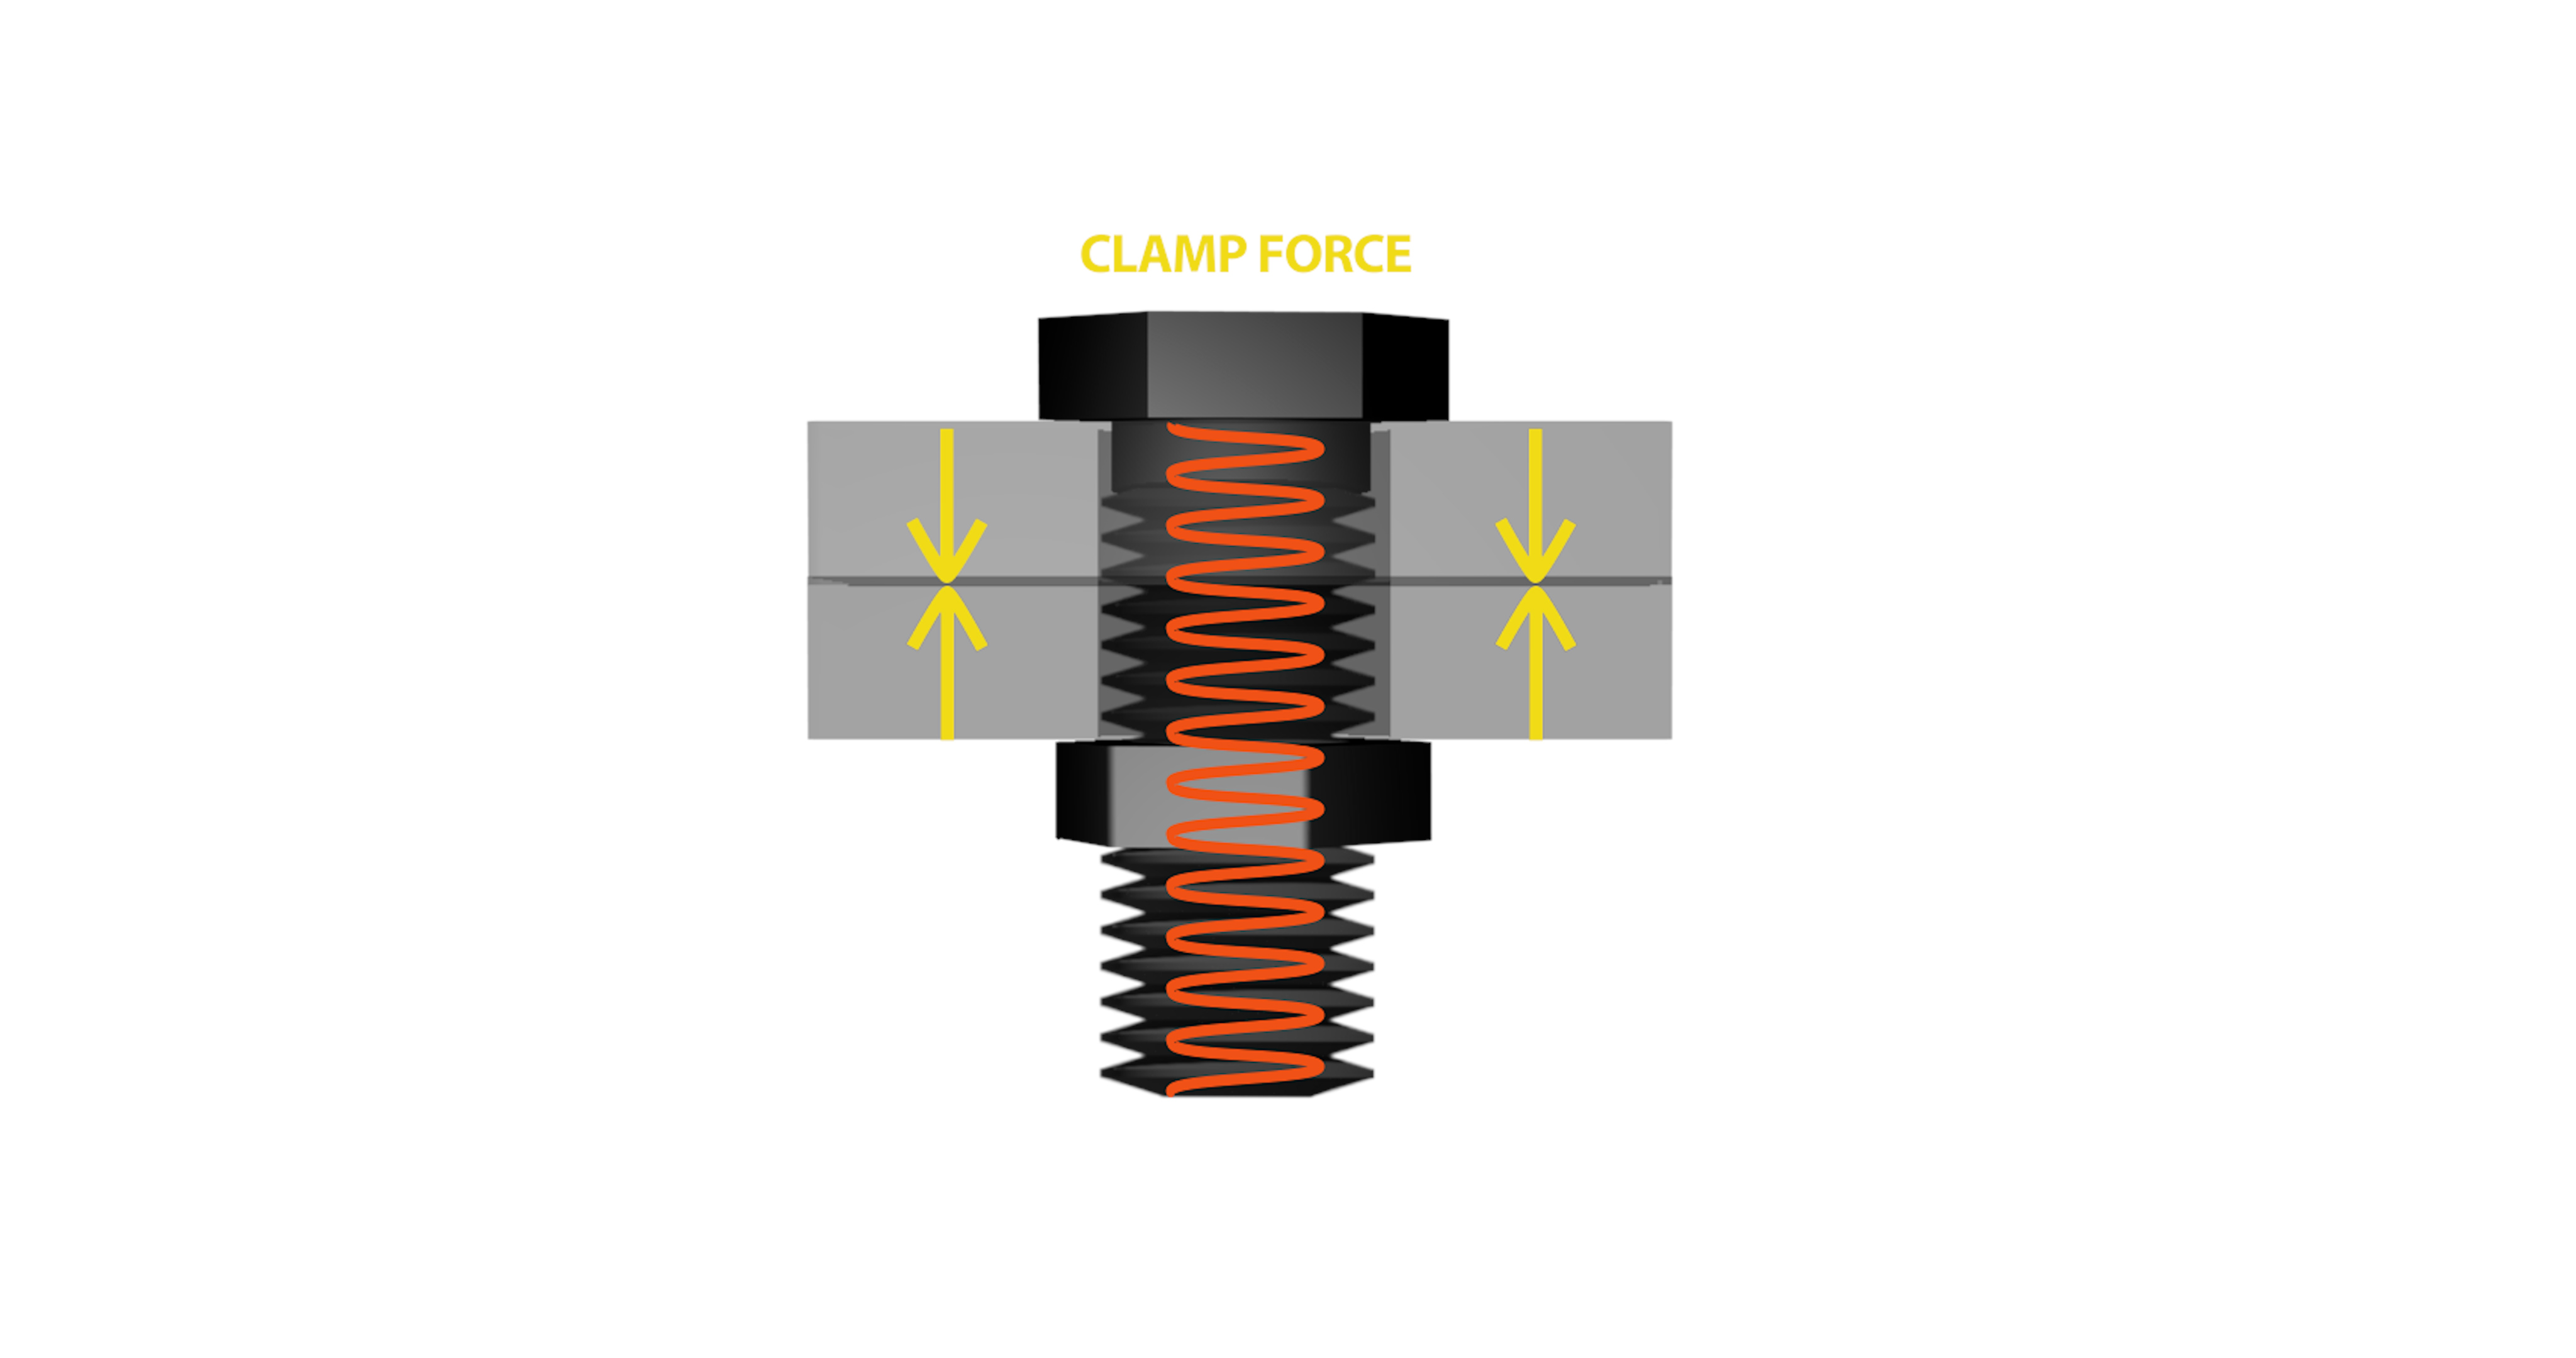 Clamp Force Illustration of Bolted Joints